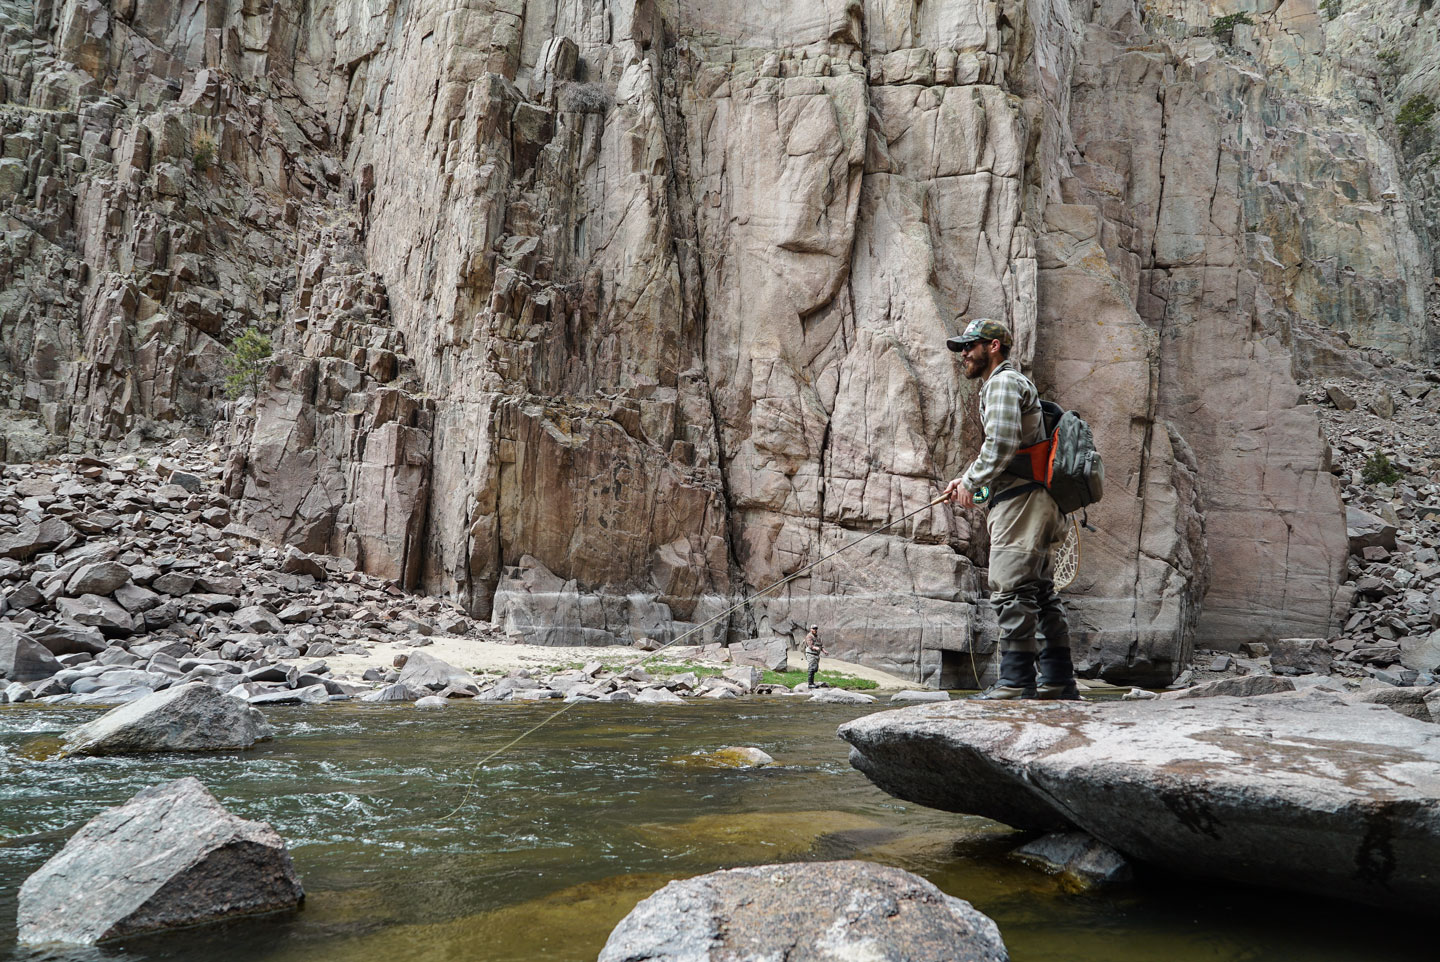 An angler fishes the rugged Fremont Canyon in central Wyoming